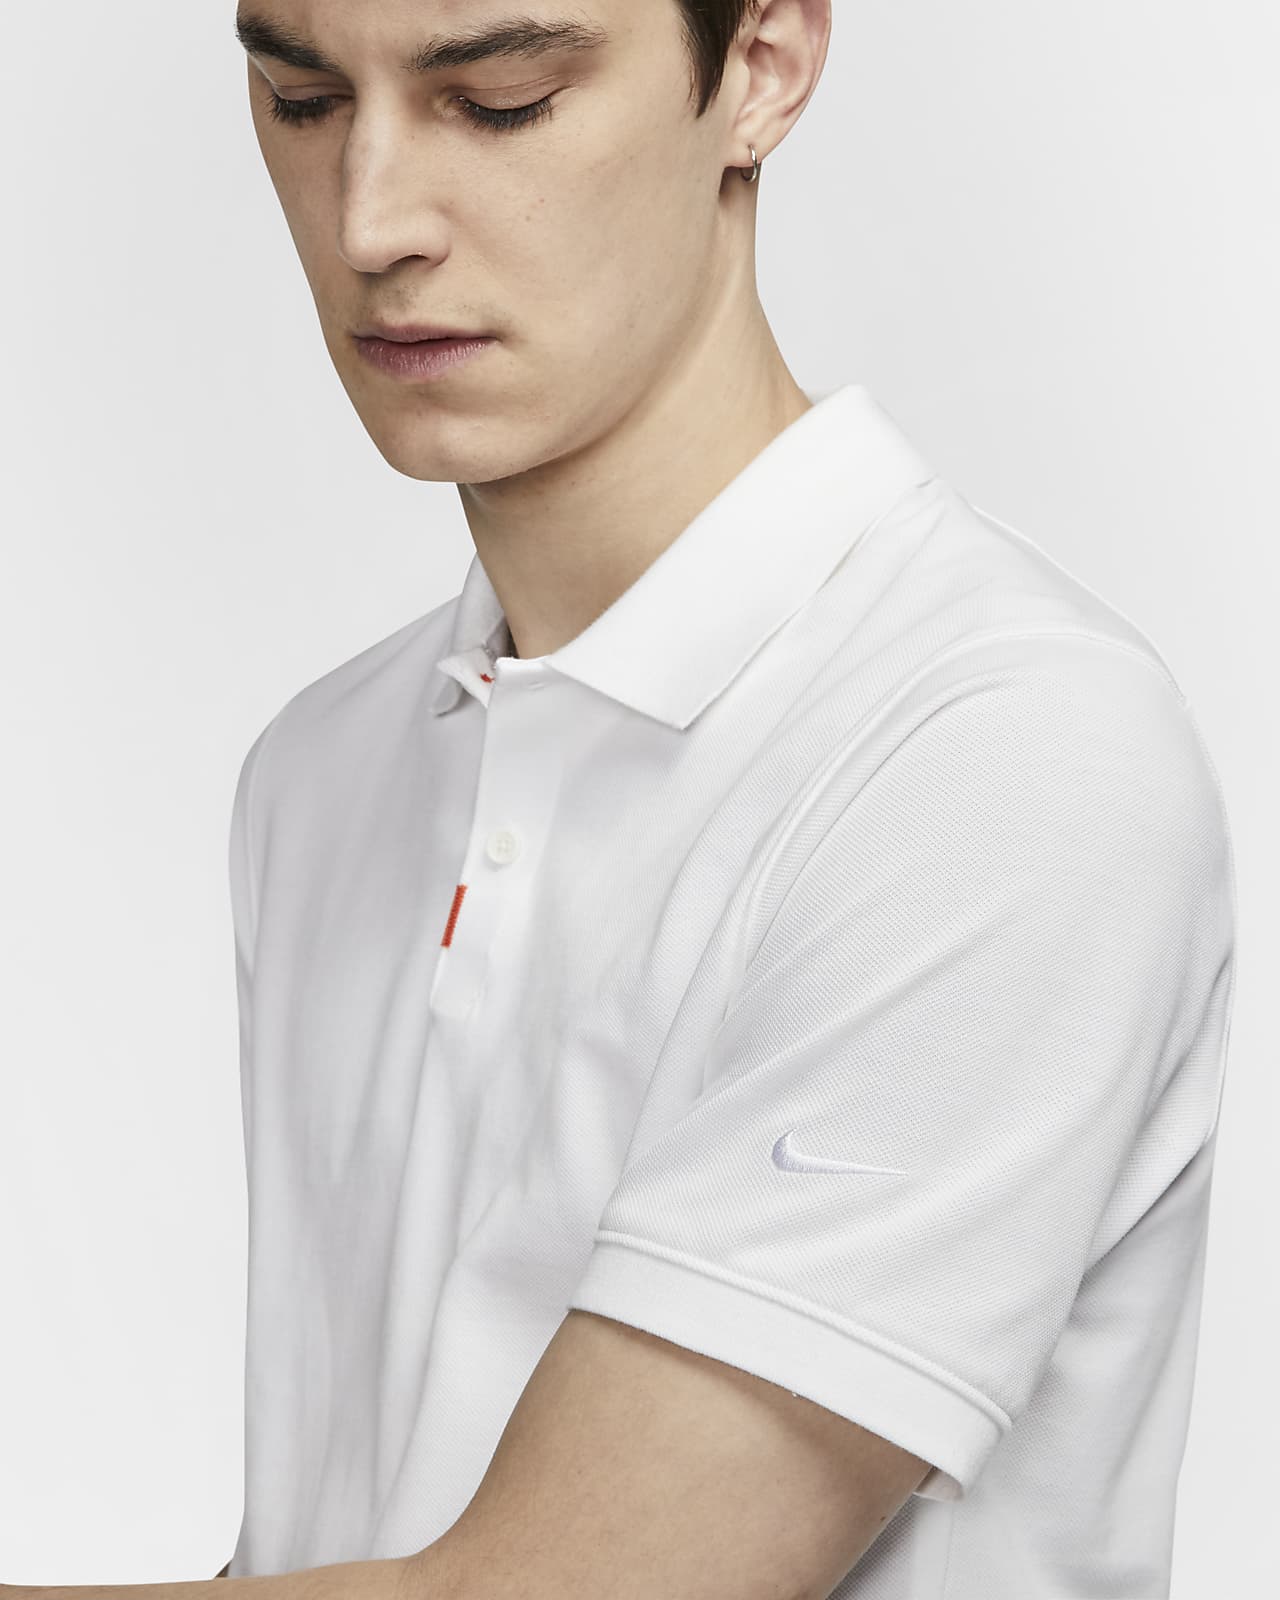 nike all day polo